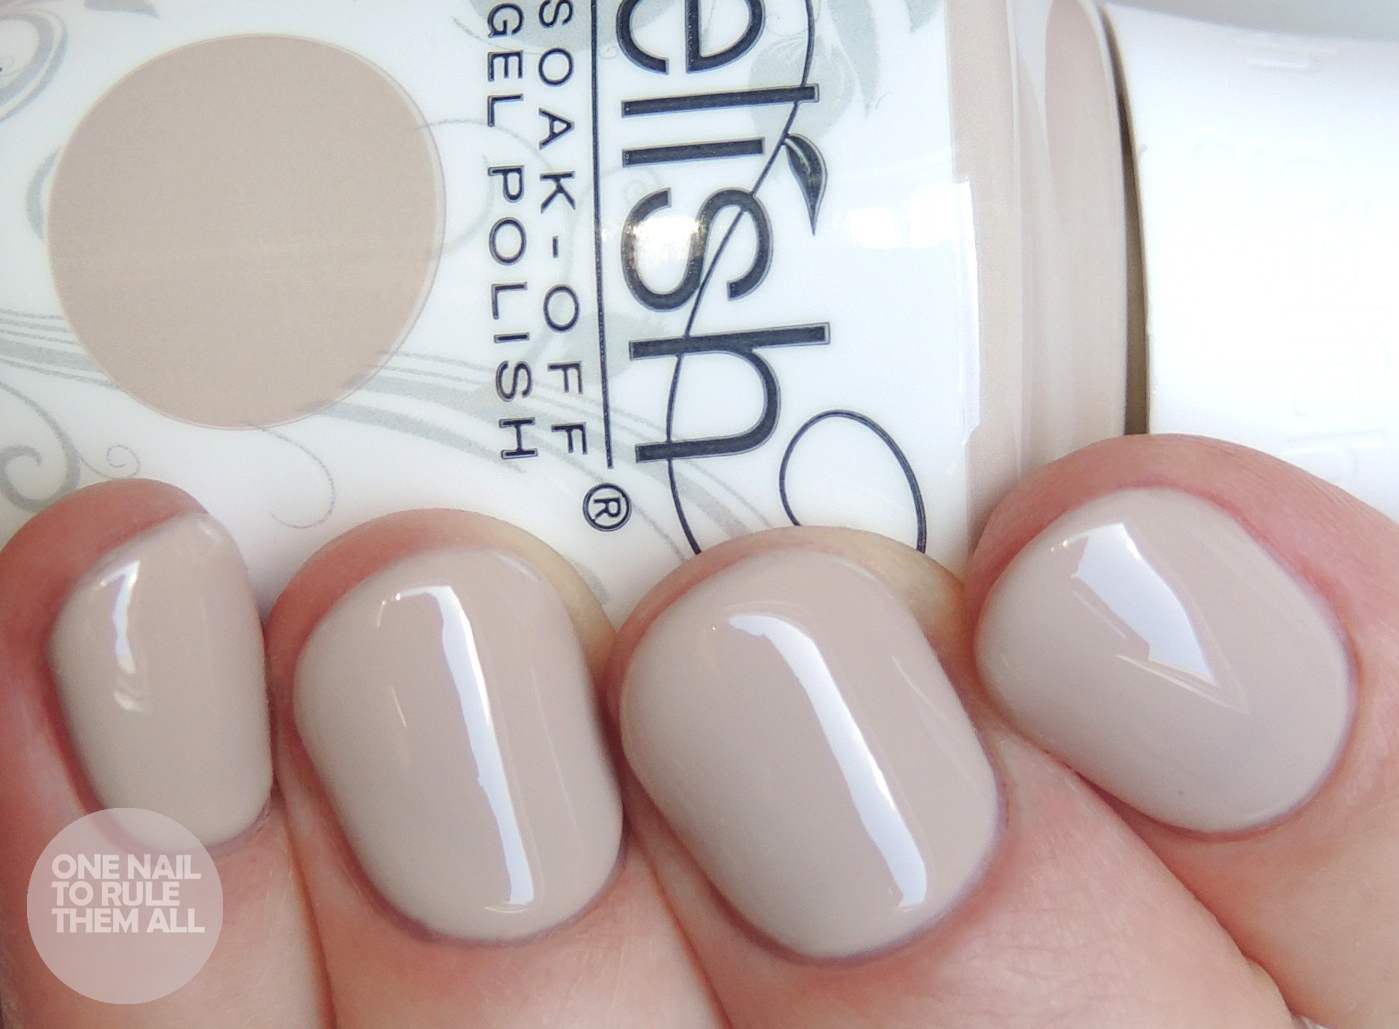 5. Gelish in "Forever Beauty" - wide 7